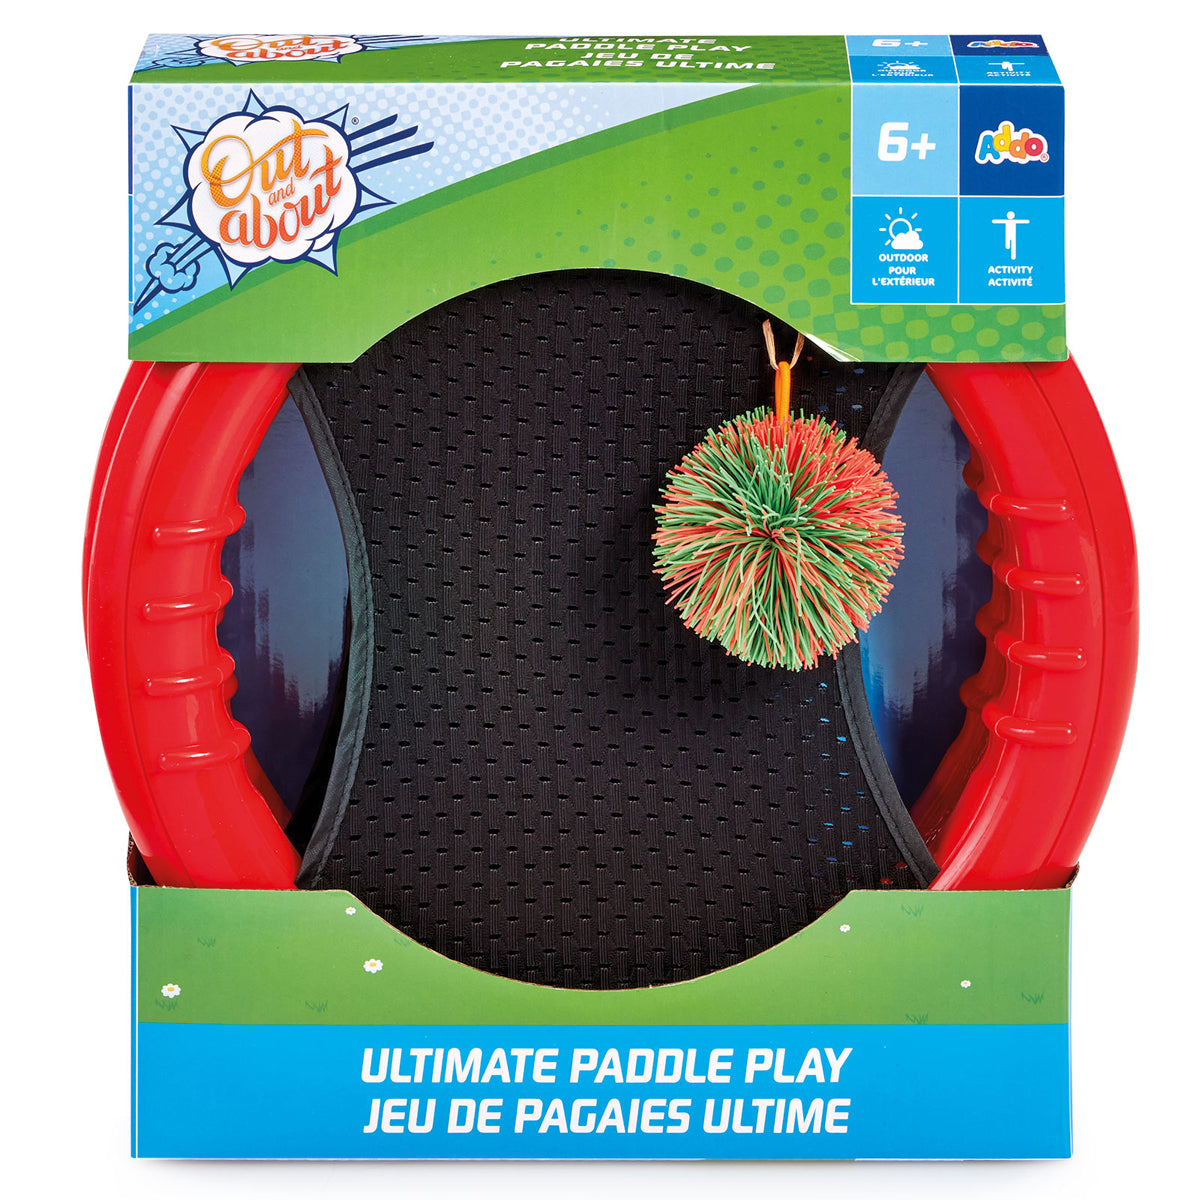 Out and About Ultimate Paddle Play Game